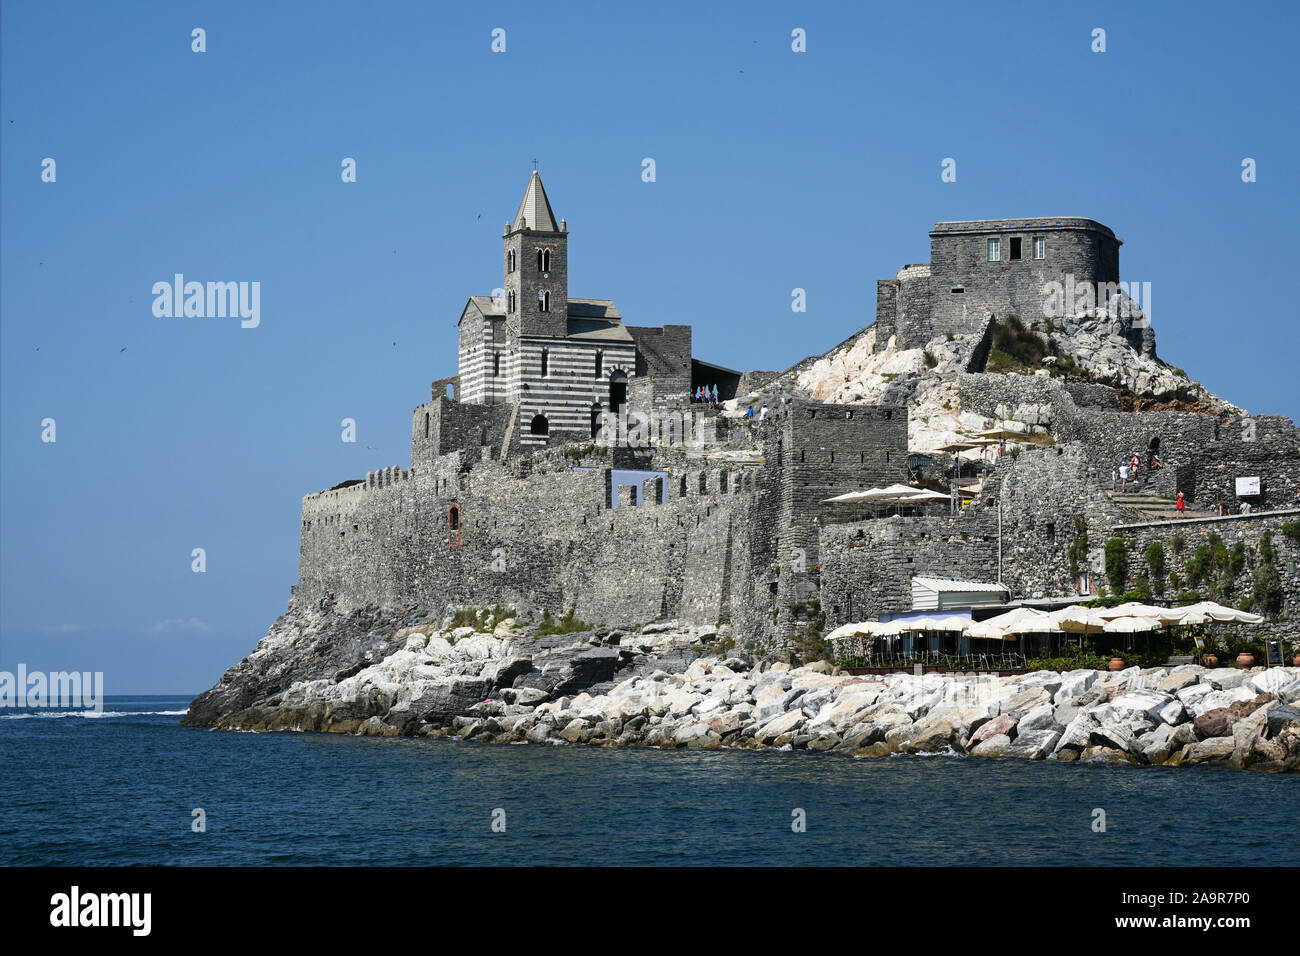 Saint Peter's Church (Chiesa di San Pietro) built on rough cliffs on the Gulf of Poets, blue sky with copy space, famous landmark in Portovenere Italy Stock Photo